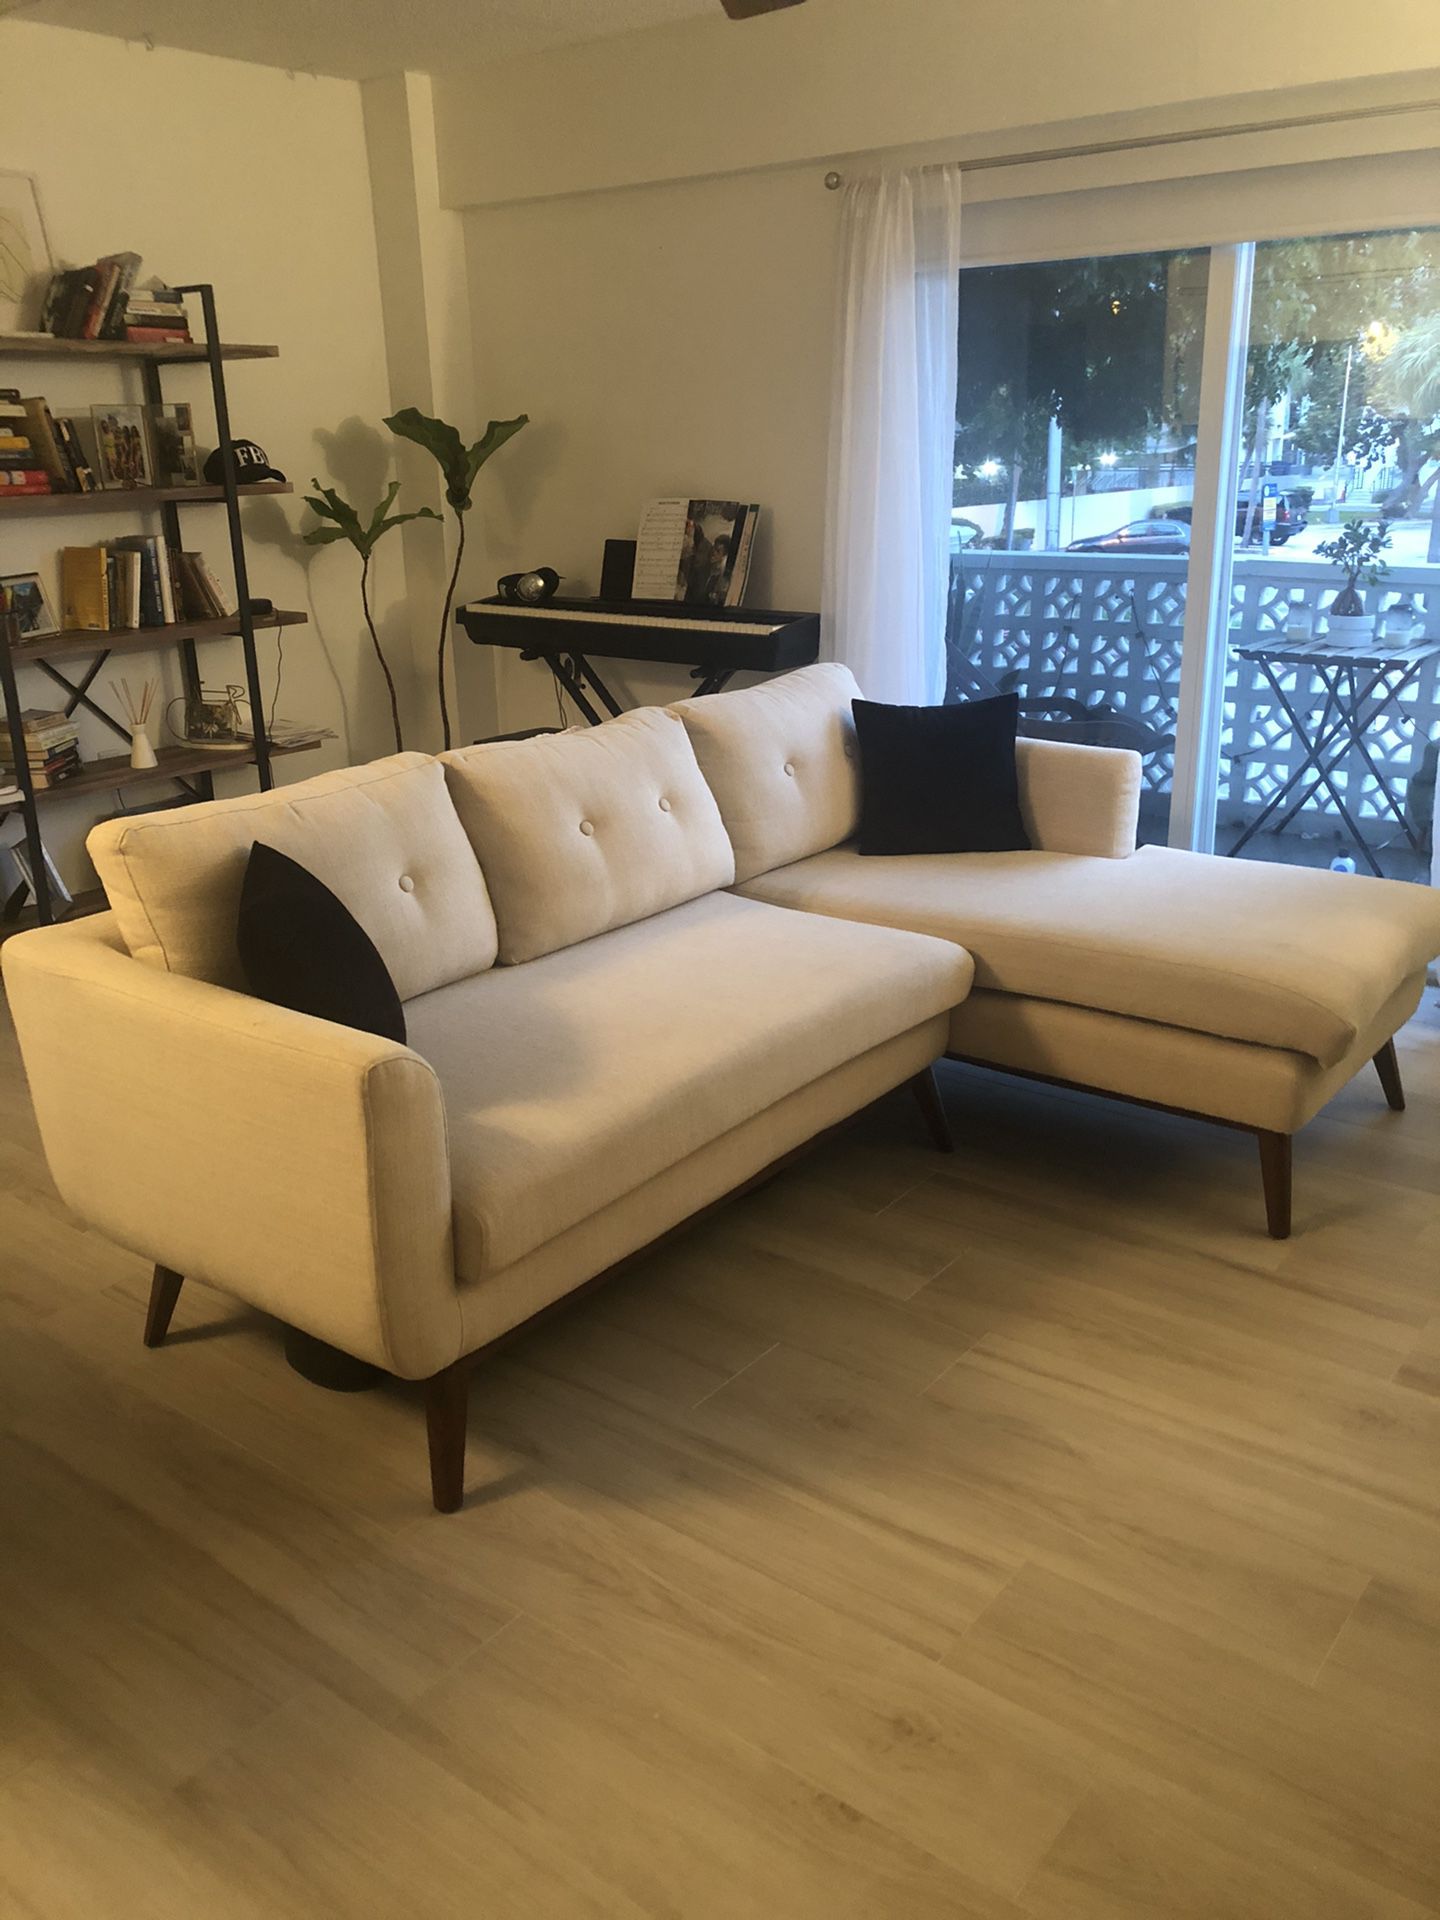 Beige and wooden sectional sofa